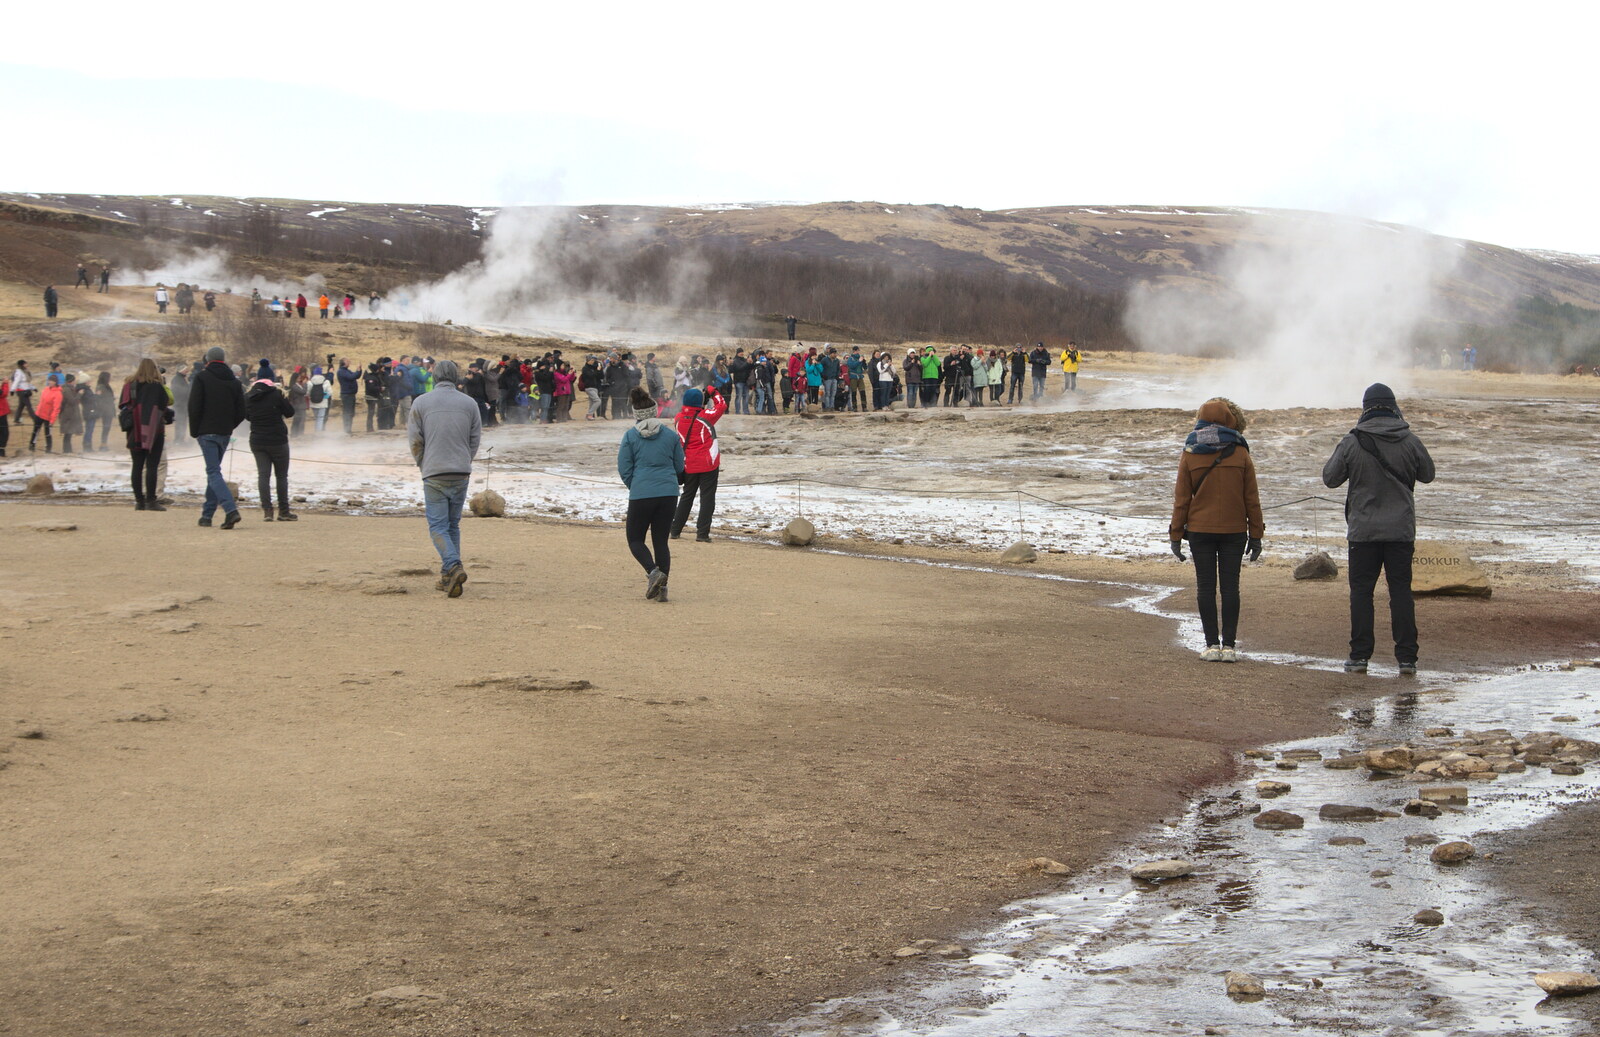 Crowds roam around at Geysir from The Golden Circle of Ísland, Iceland - 22nd April 2017